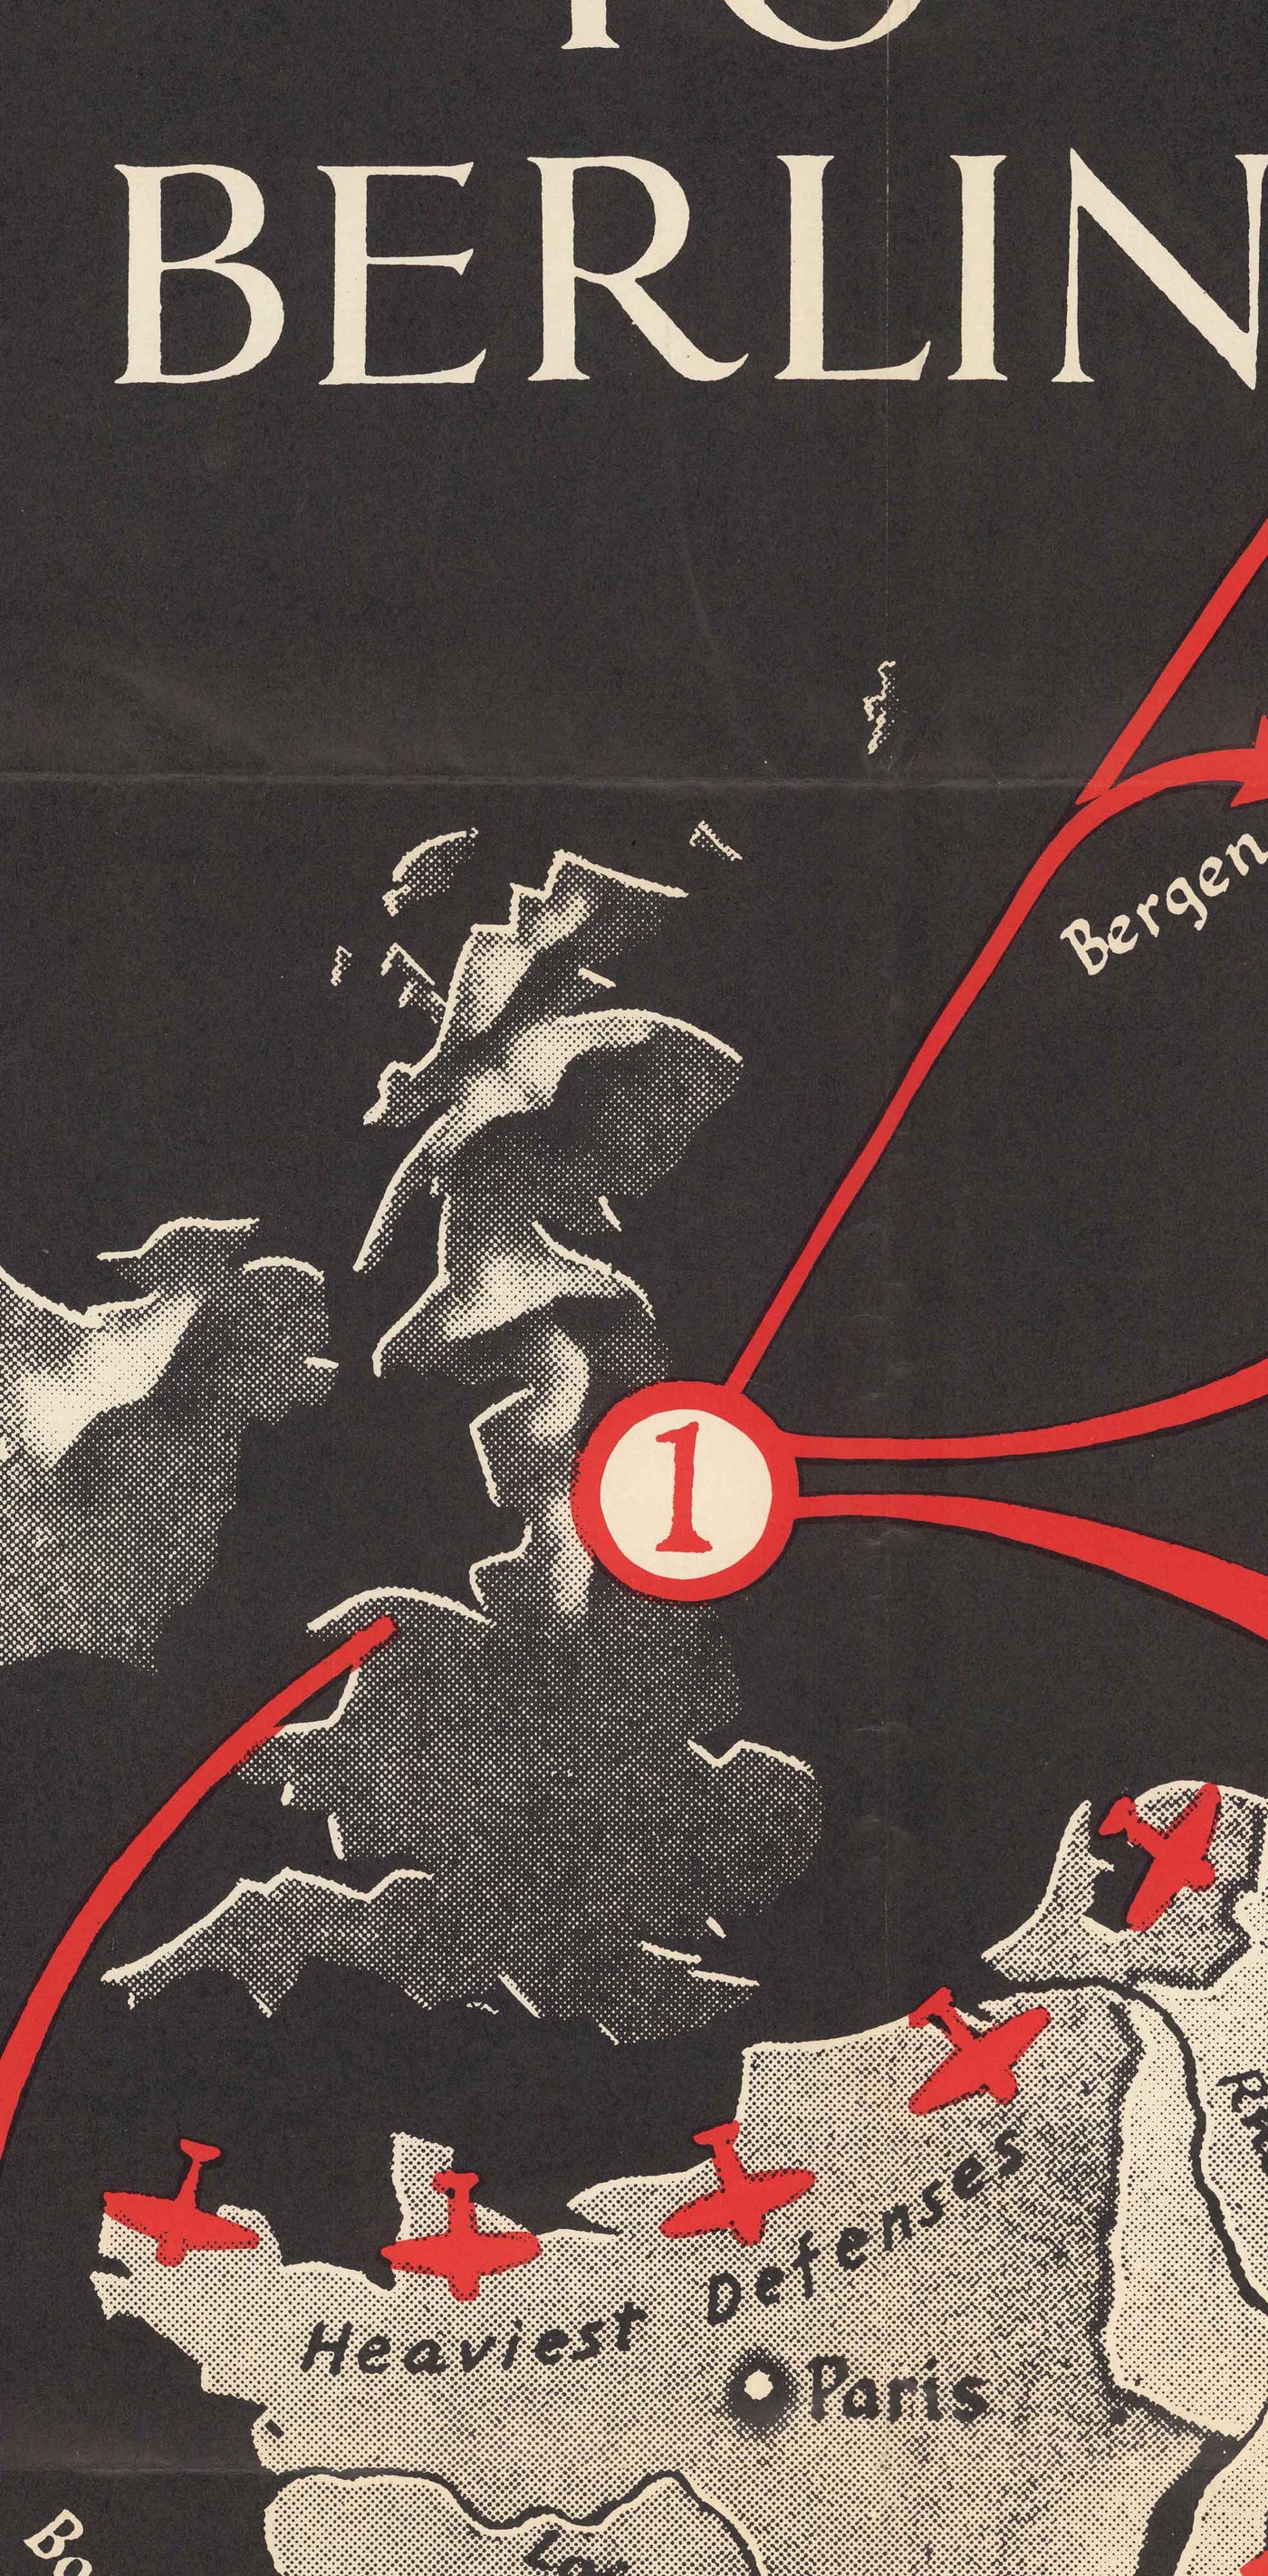 The Routes To Berlin, 1943 - Old World War 2 Map (with a Sad Little Hitler)